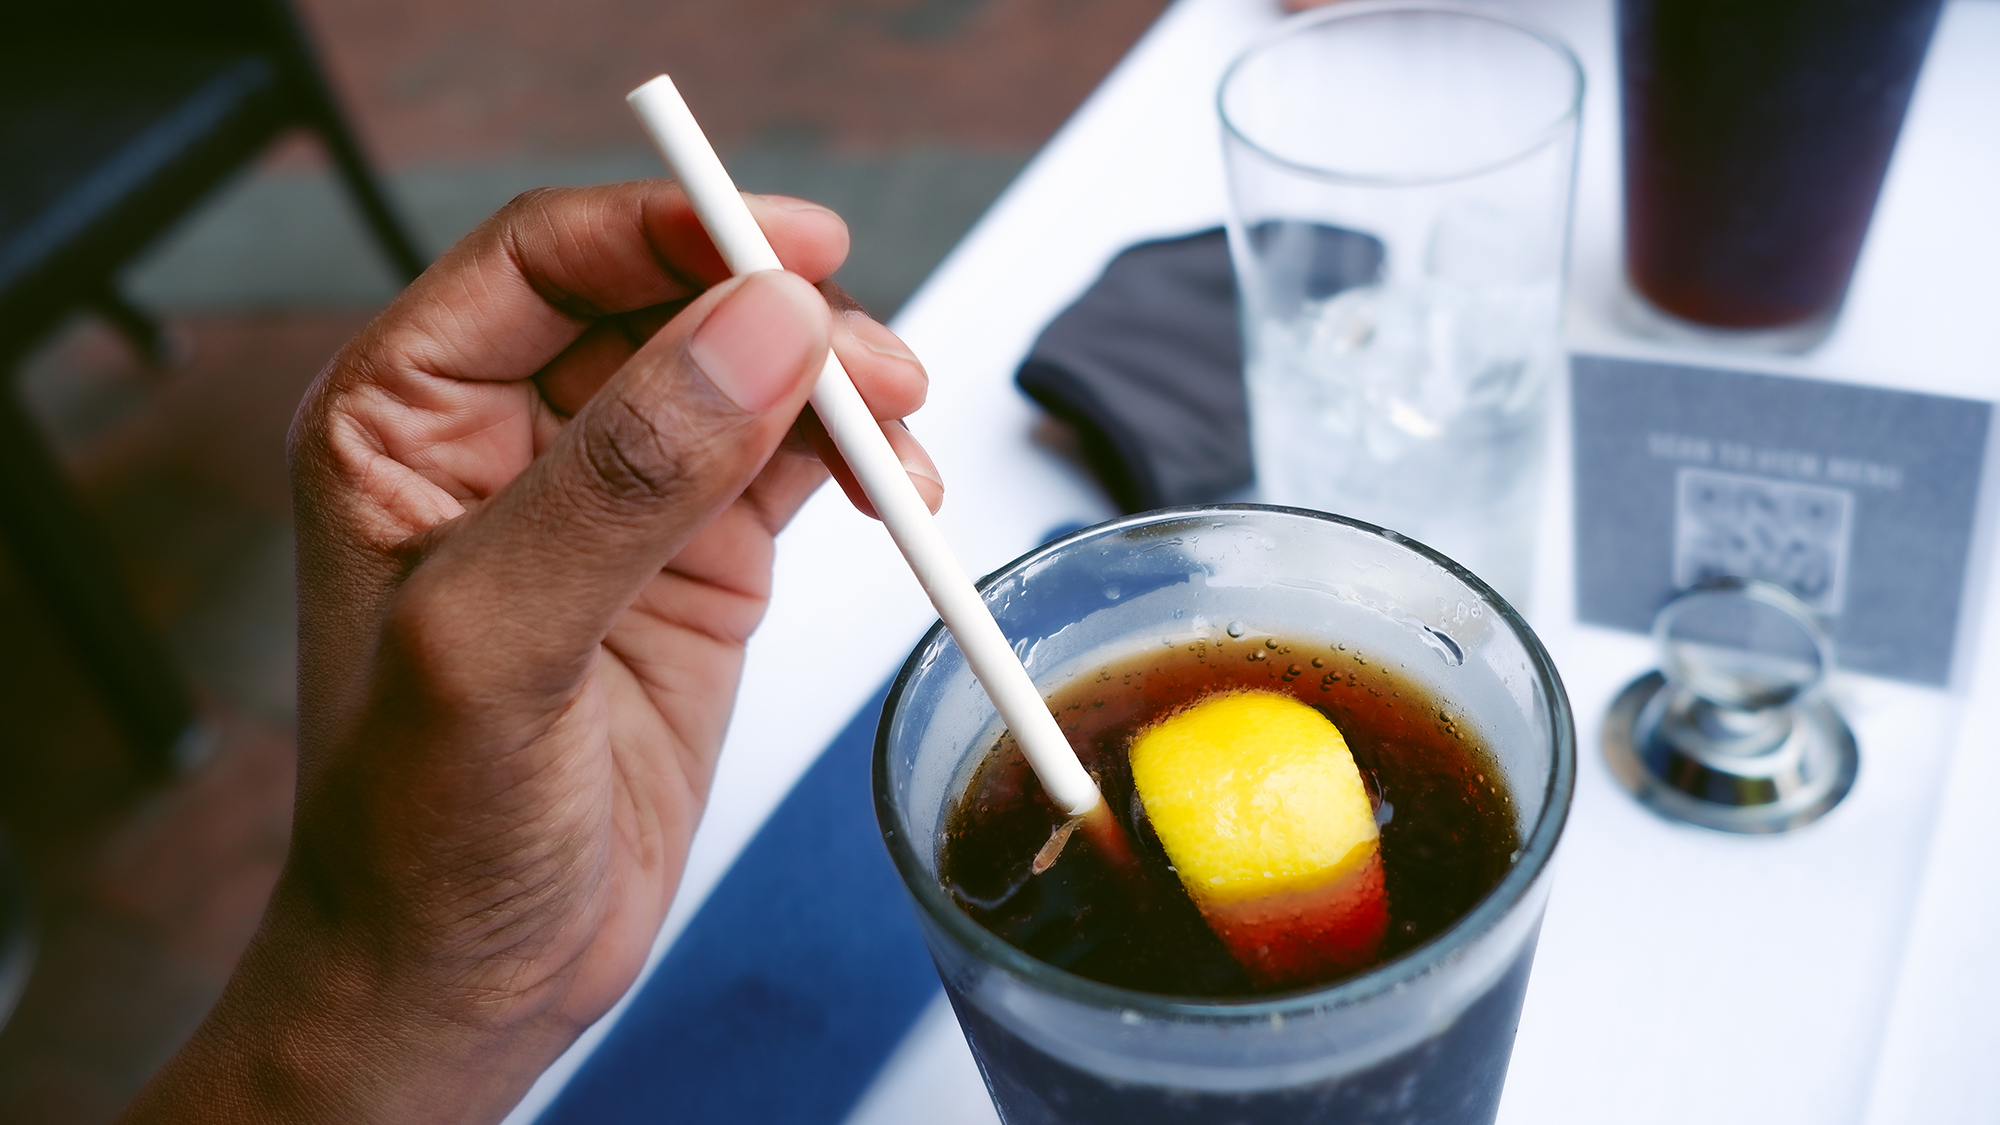 Paper straws get soggy and fall apart more quickly, reusable straws made of metal are not easy to bend, and silicone straws are difficult to clean. Getty Images